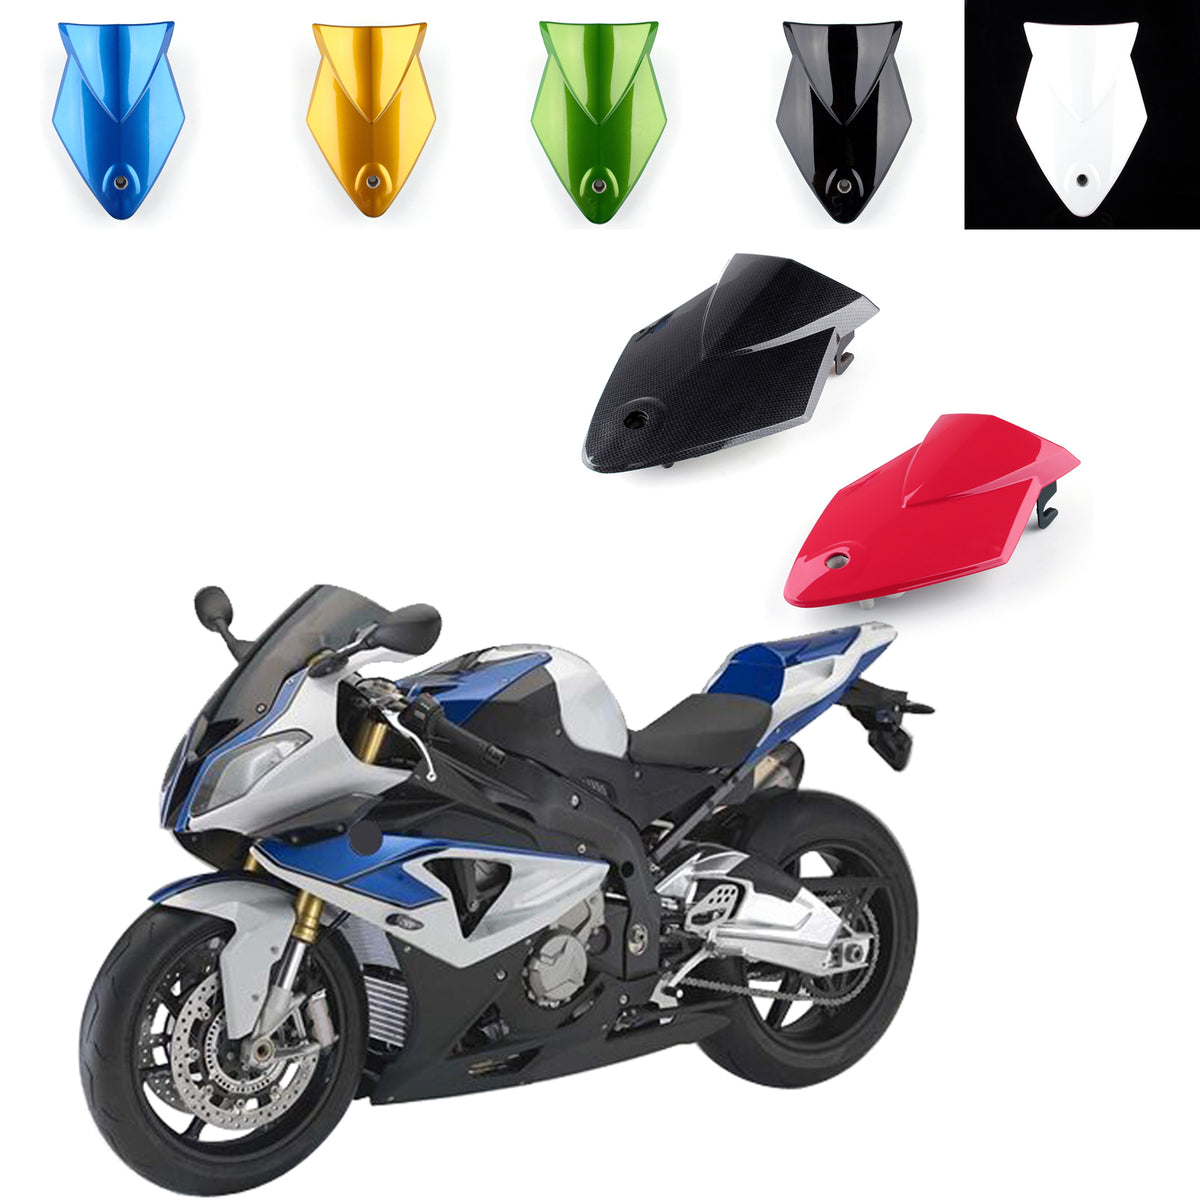 Rear Seat Cover cowl For BMW S1000RR 2009-2014